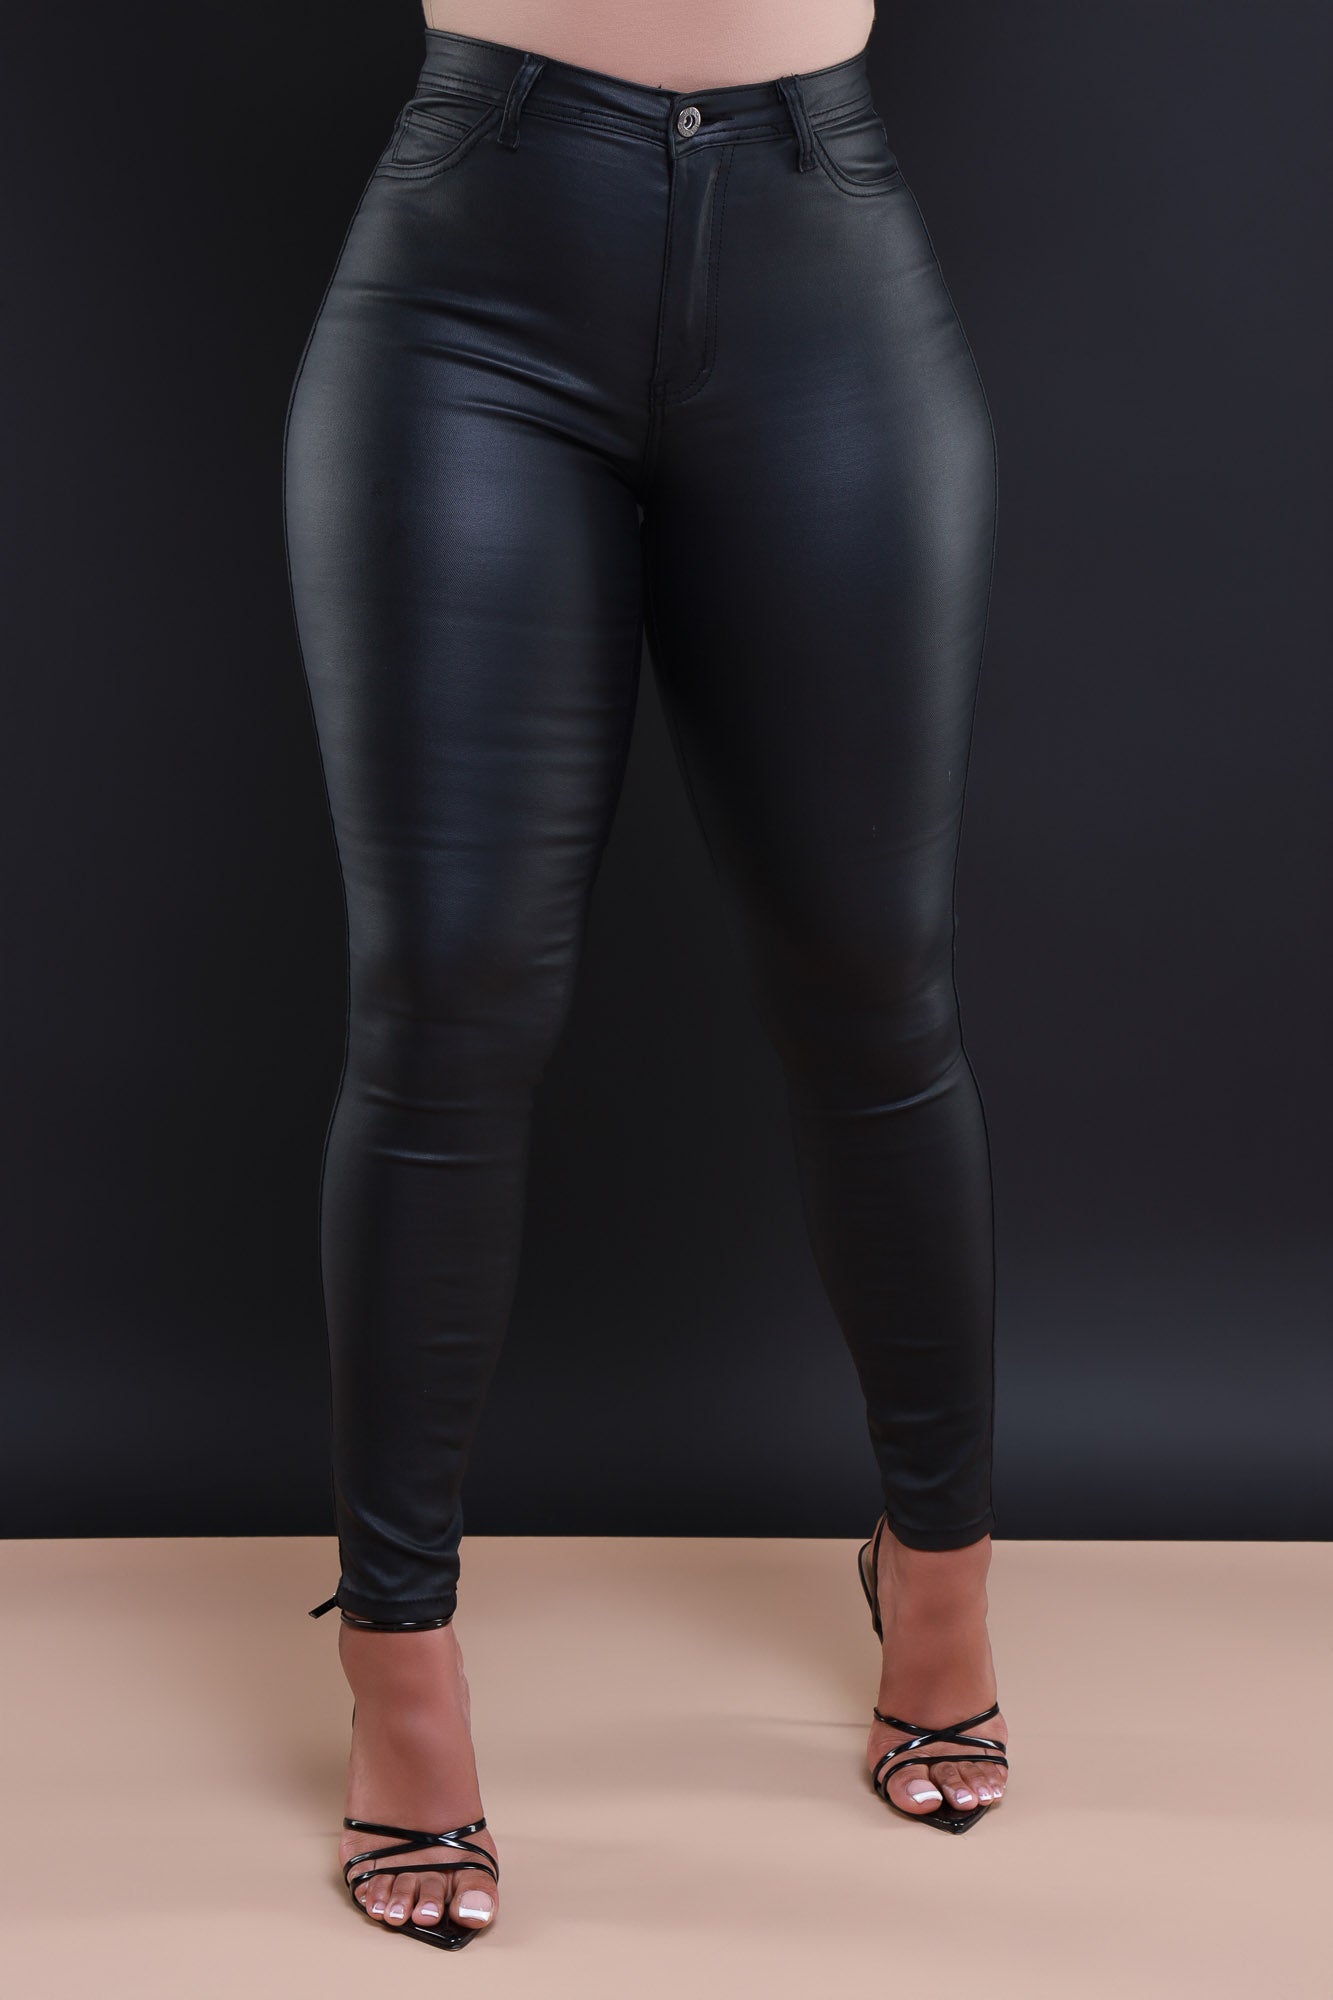 These Faux Leather Pants Work Magic on My Curves and Make My